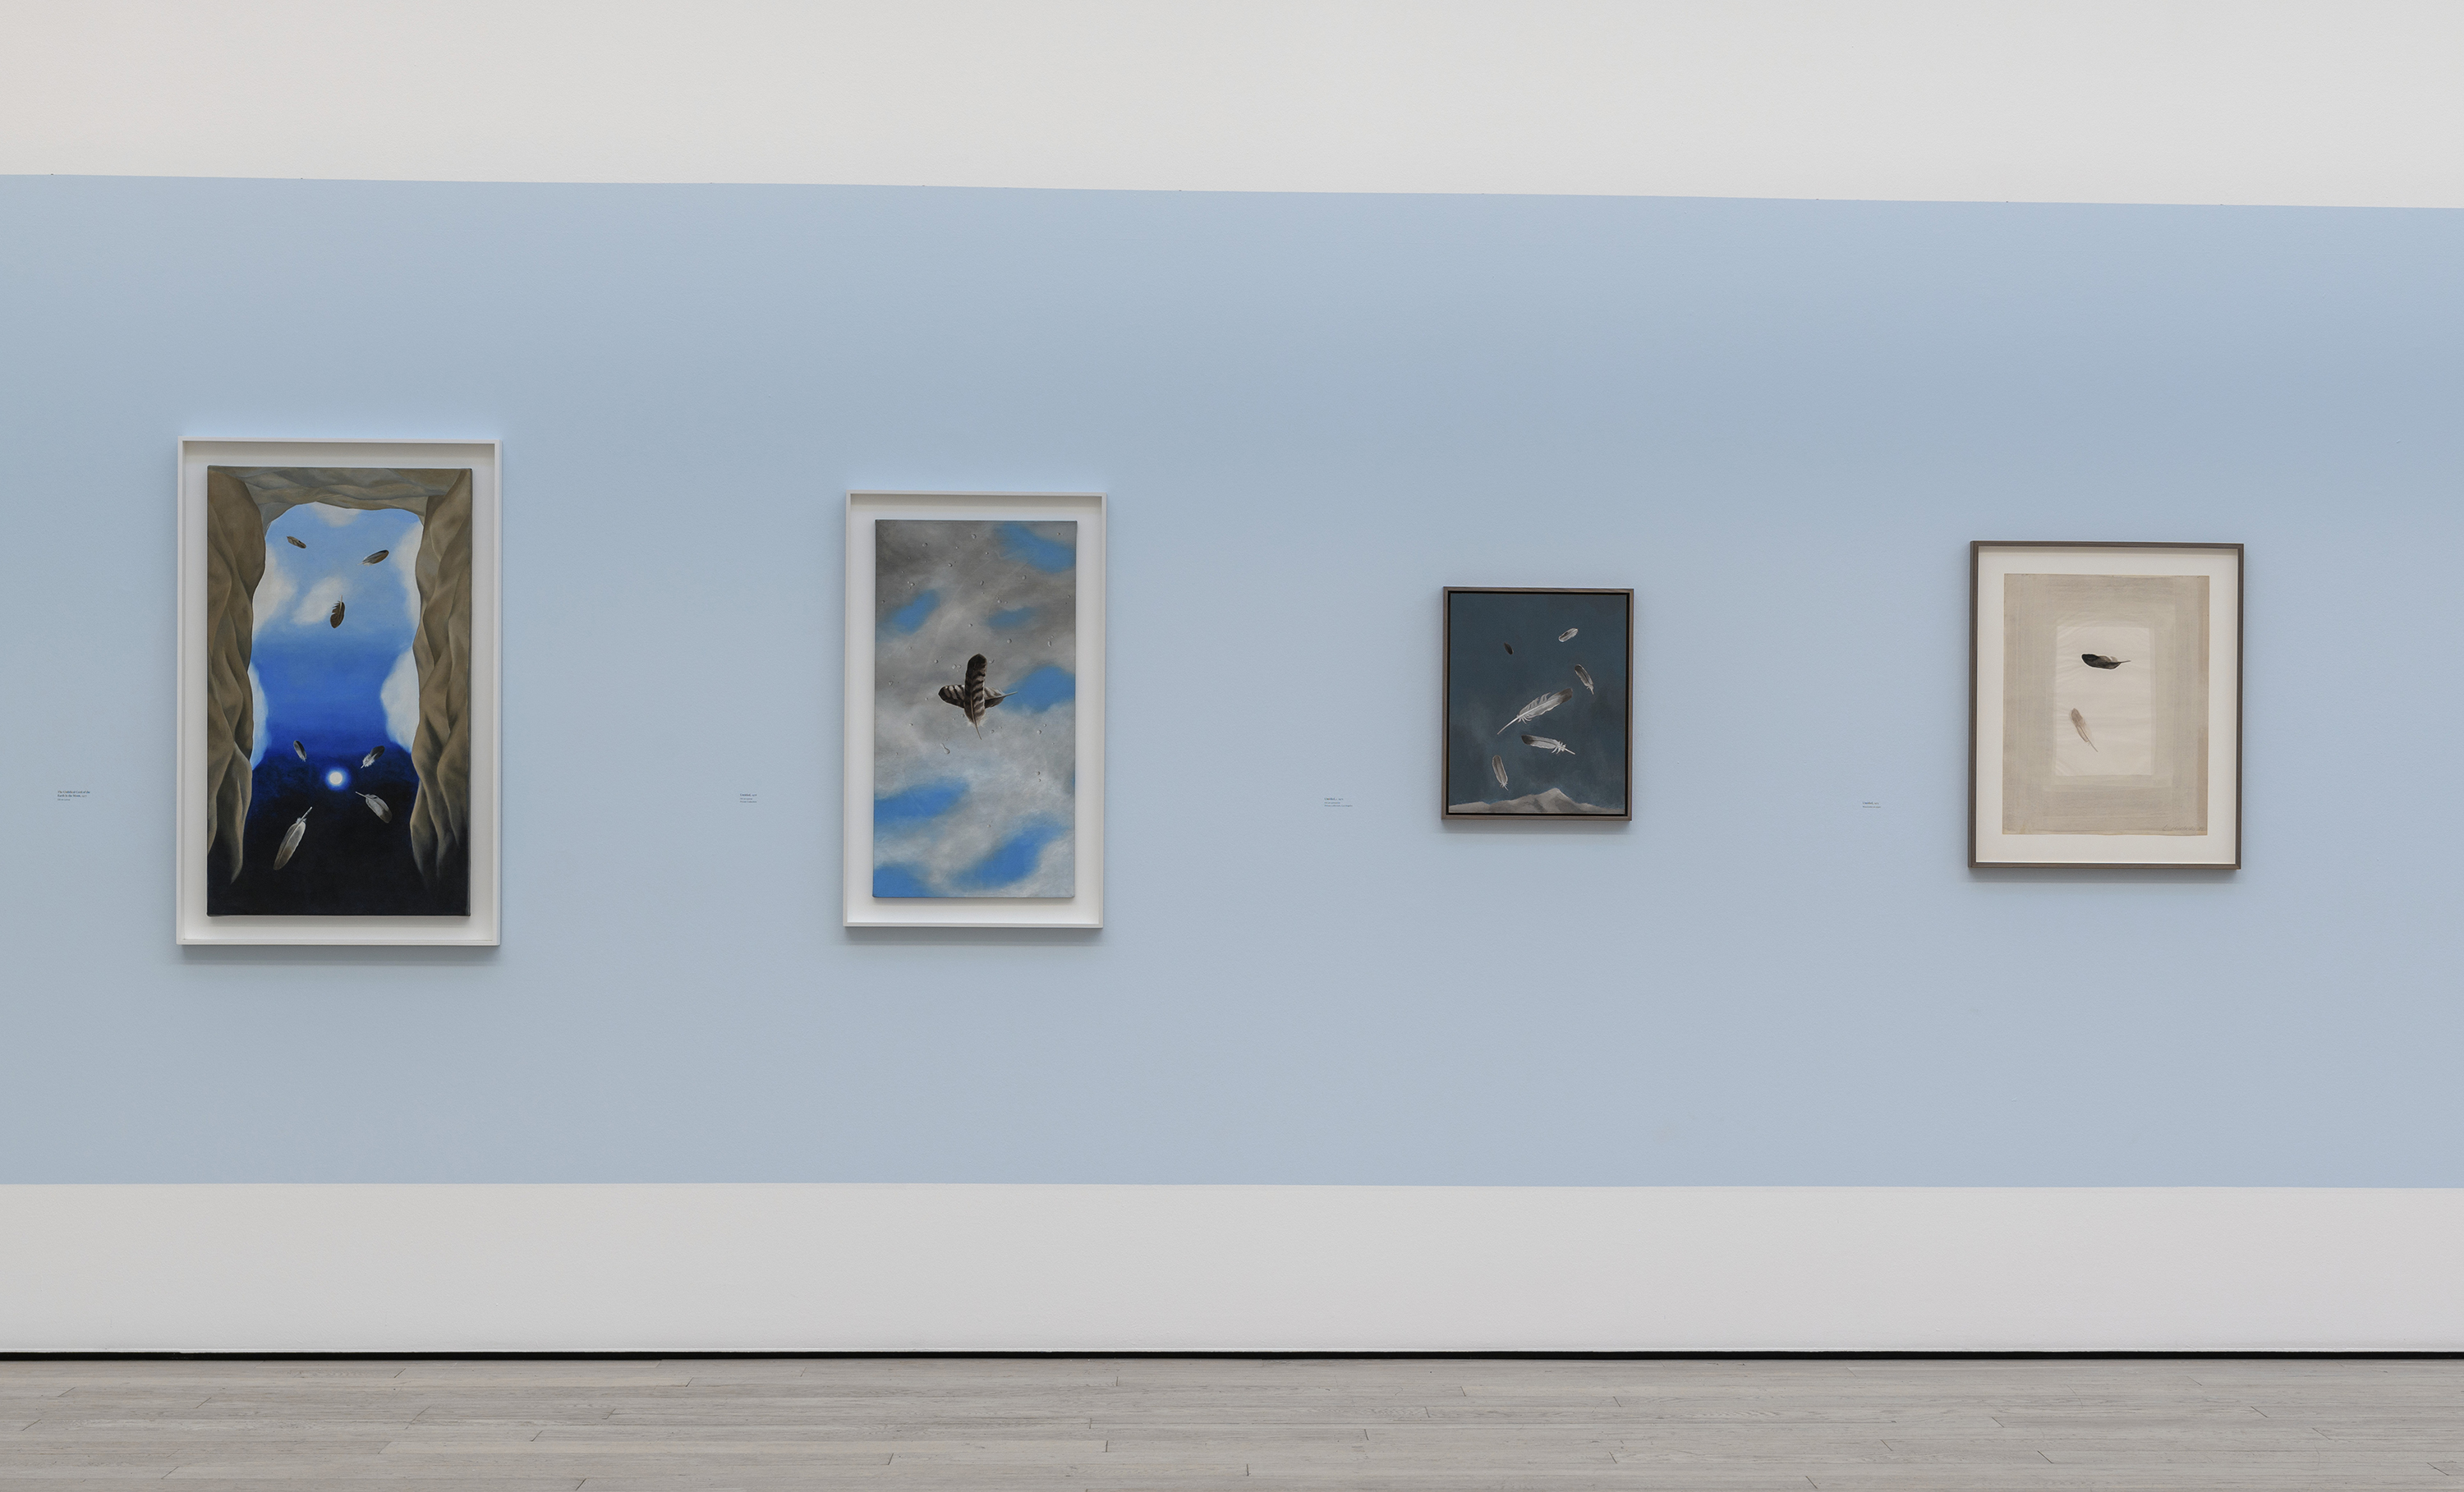 Installation photograph, Luchita Hurtado: I Live I Die I Will Be Reborn, Los Angeles County Museum of Art, 2020, art © Luchita Hurtado, photo © Museum Associates/LACMA. Installation view of paintings incorporating the feather motif.